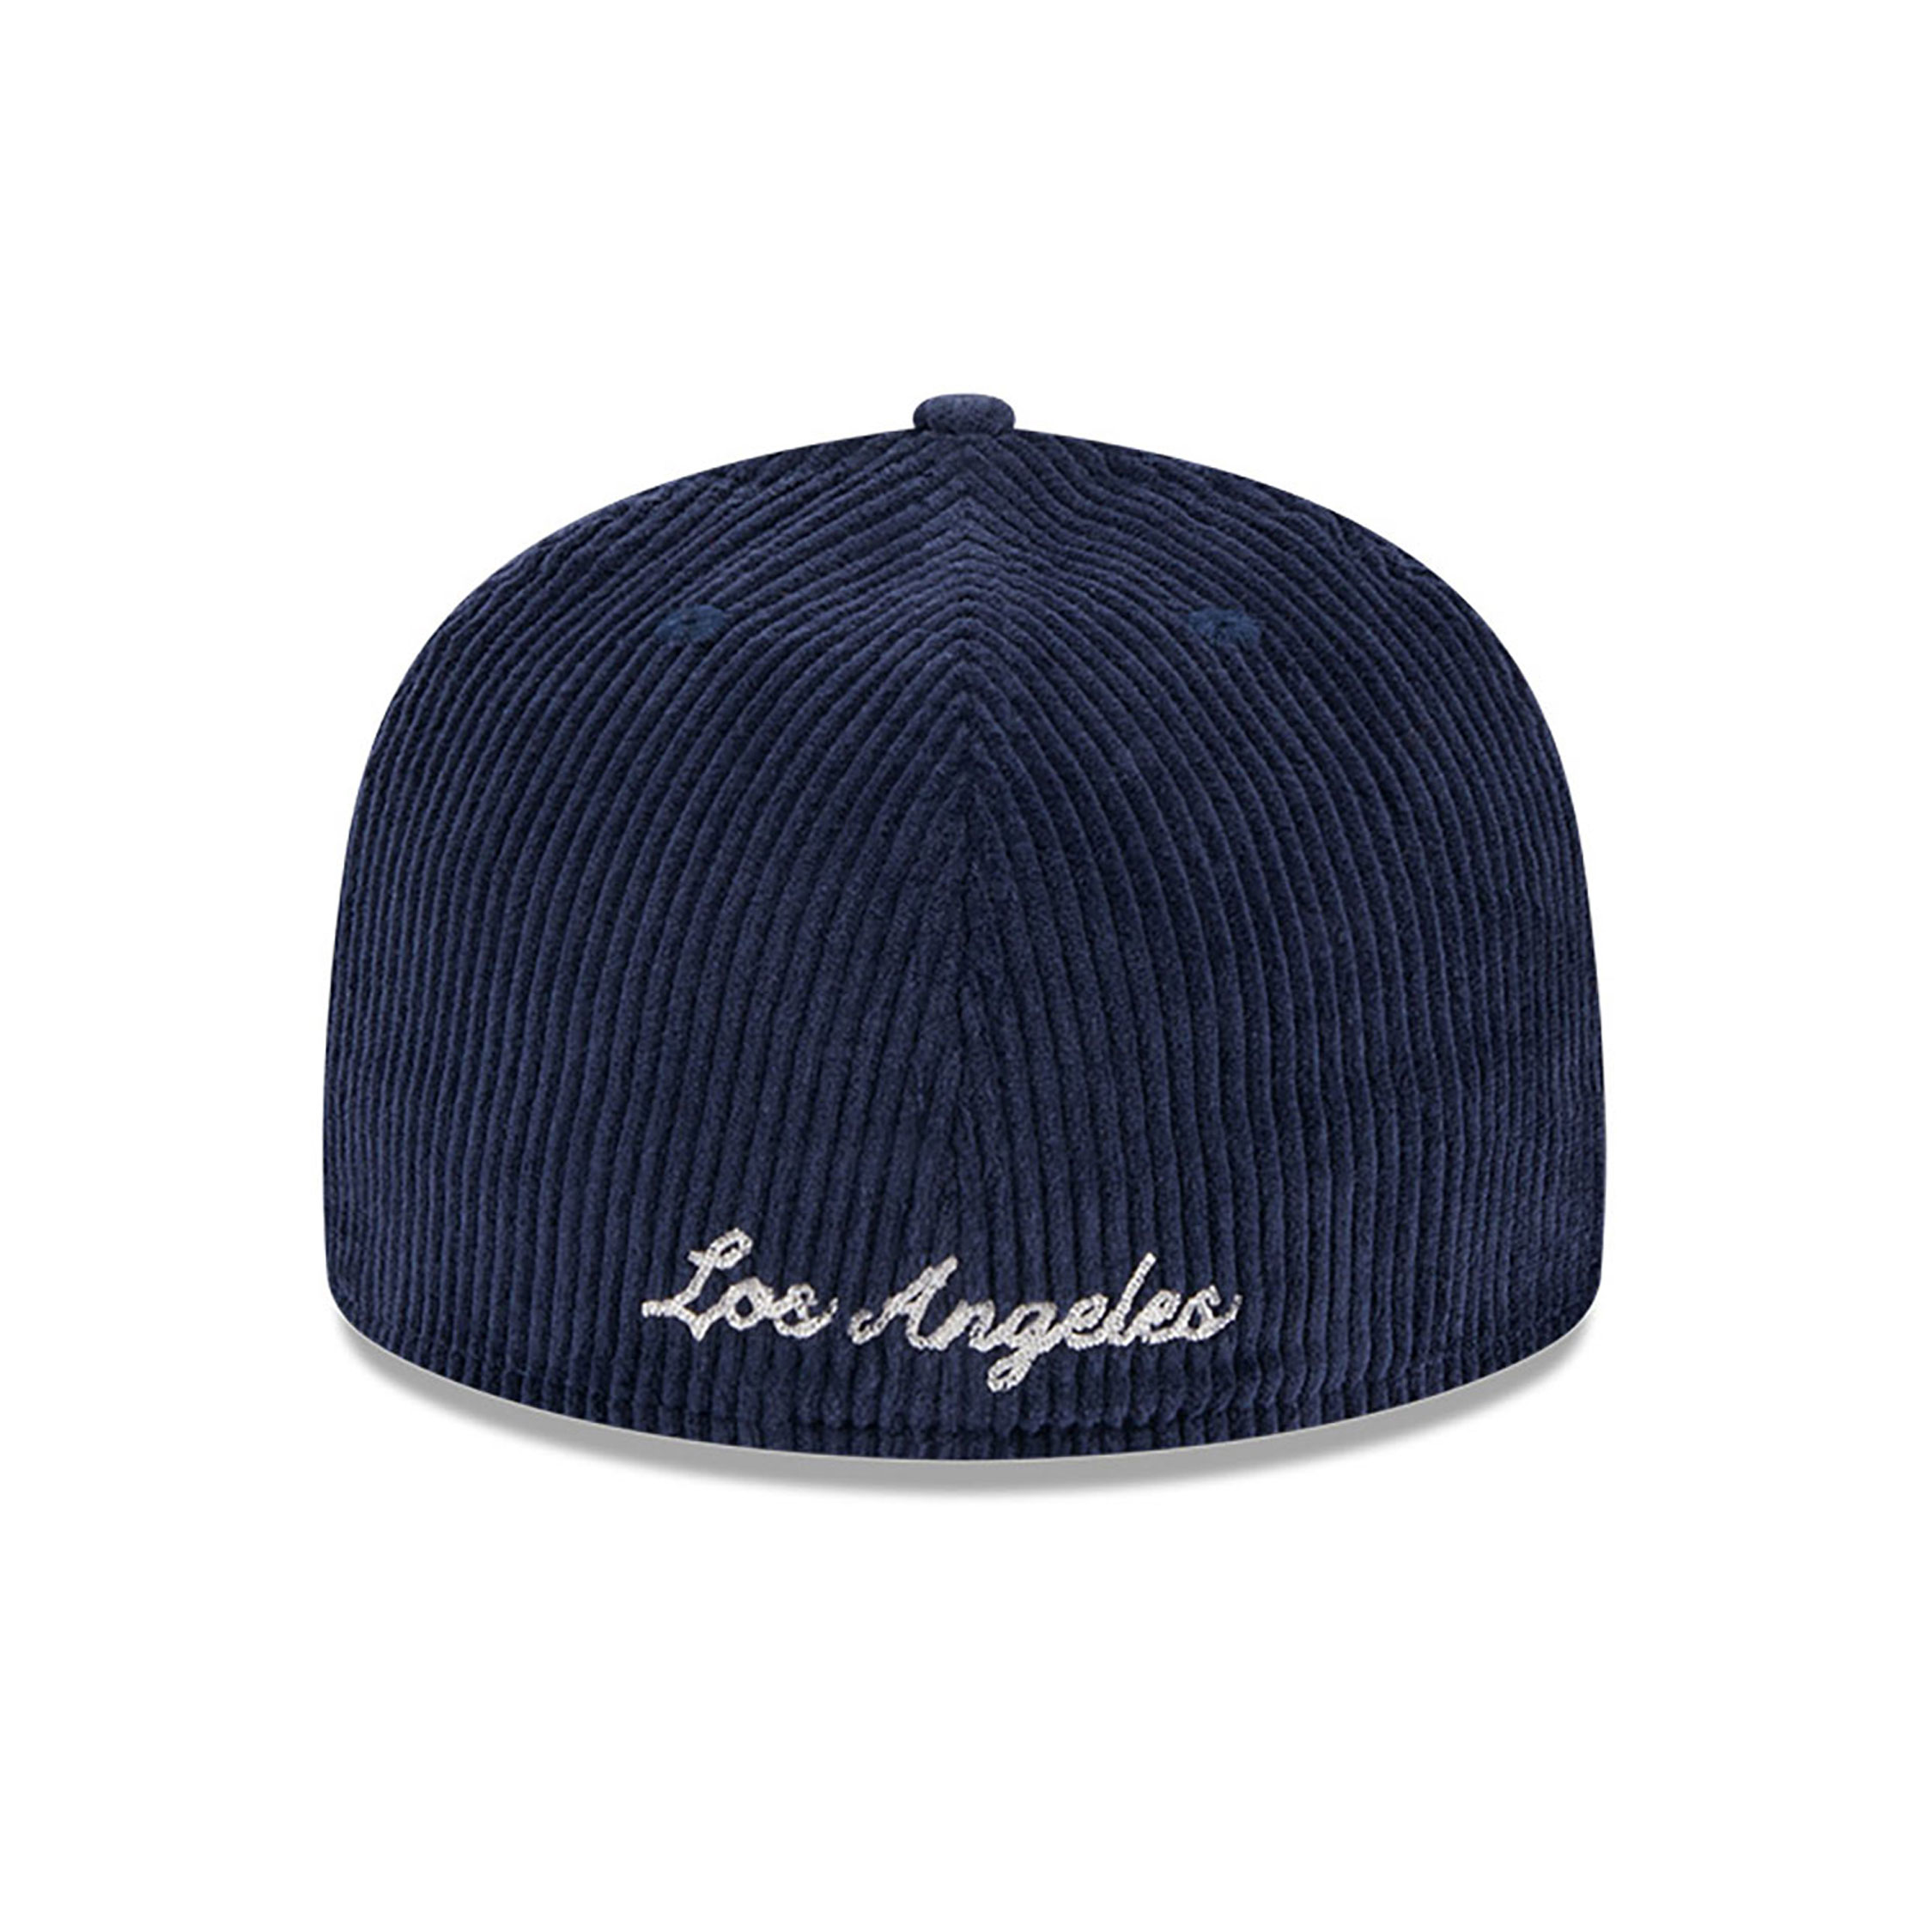 LA Dodgers Letterman Pin Cord Navy 59FIFTY Fitted Cap